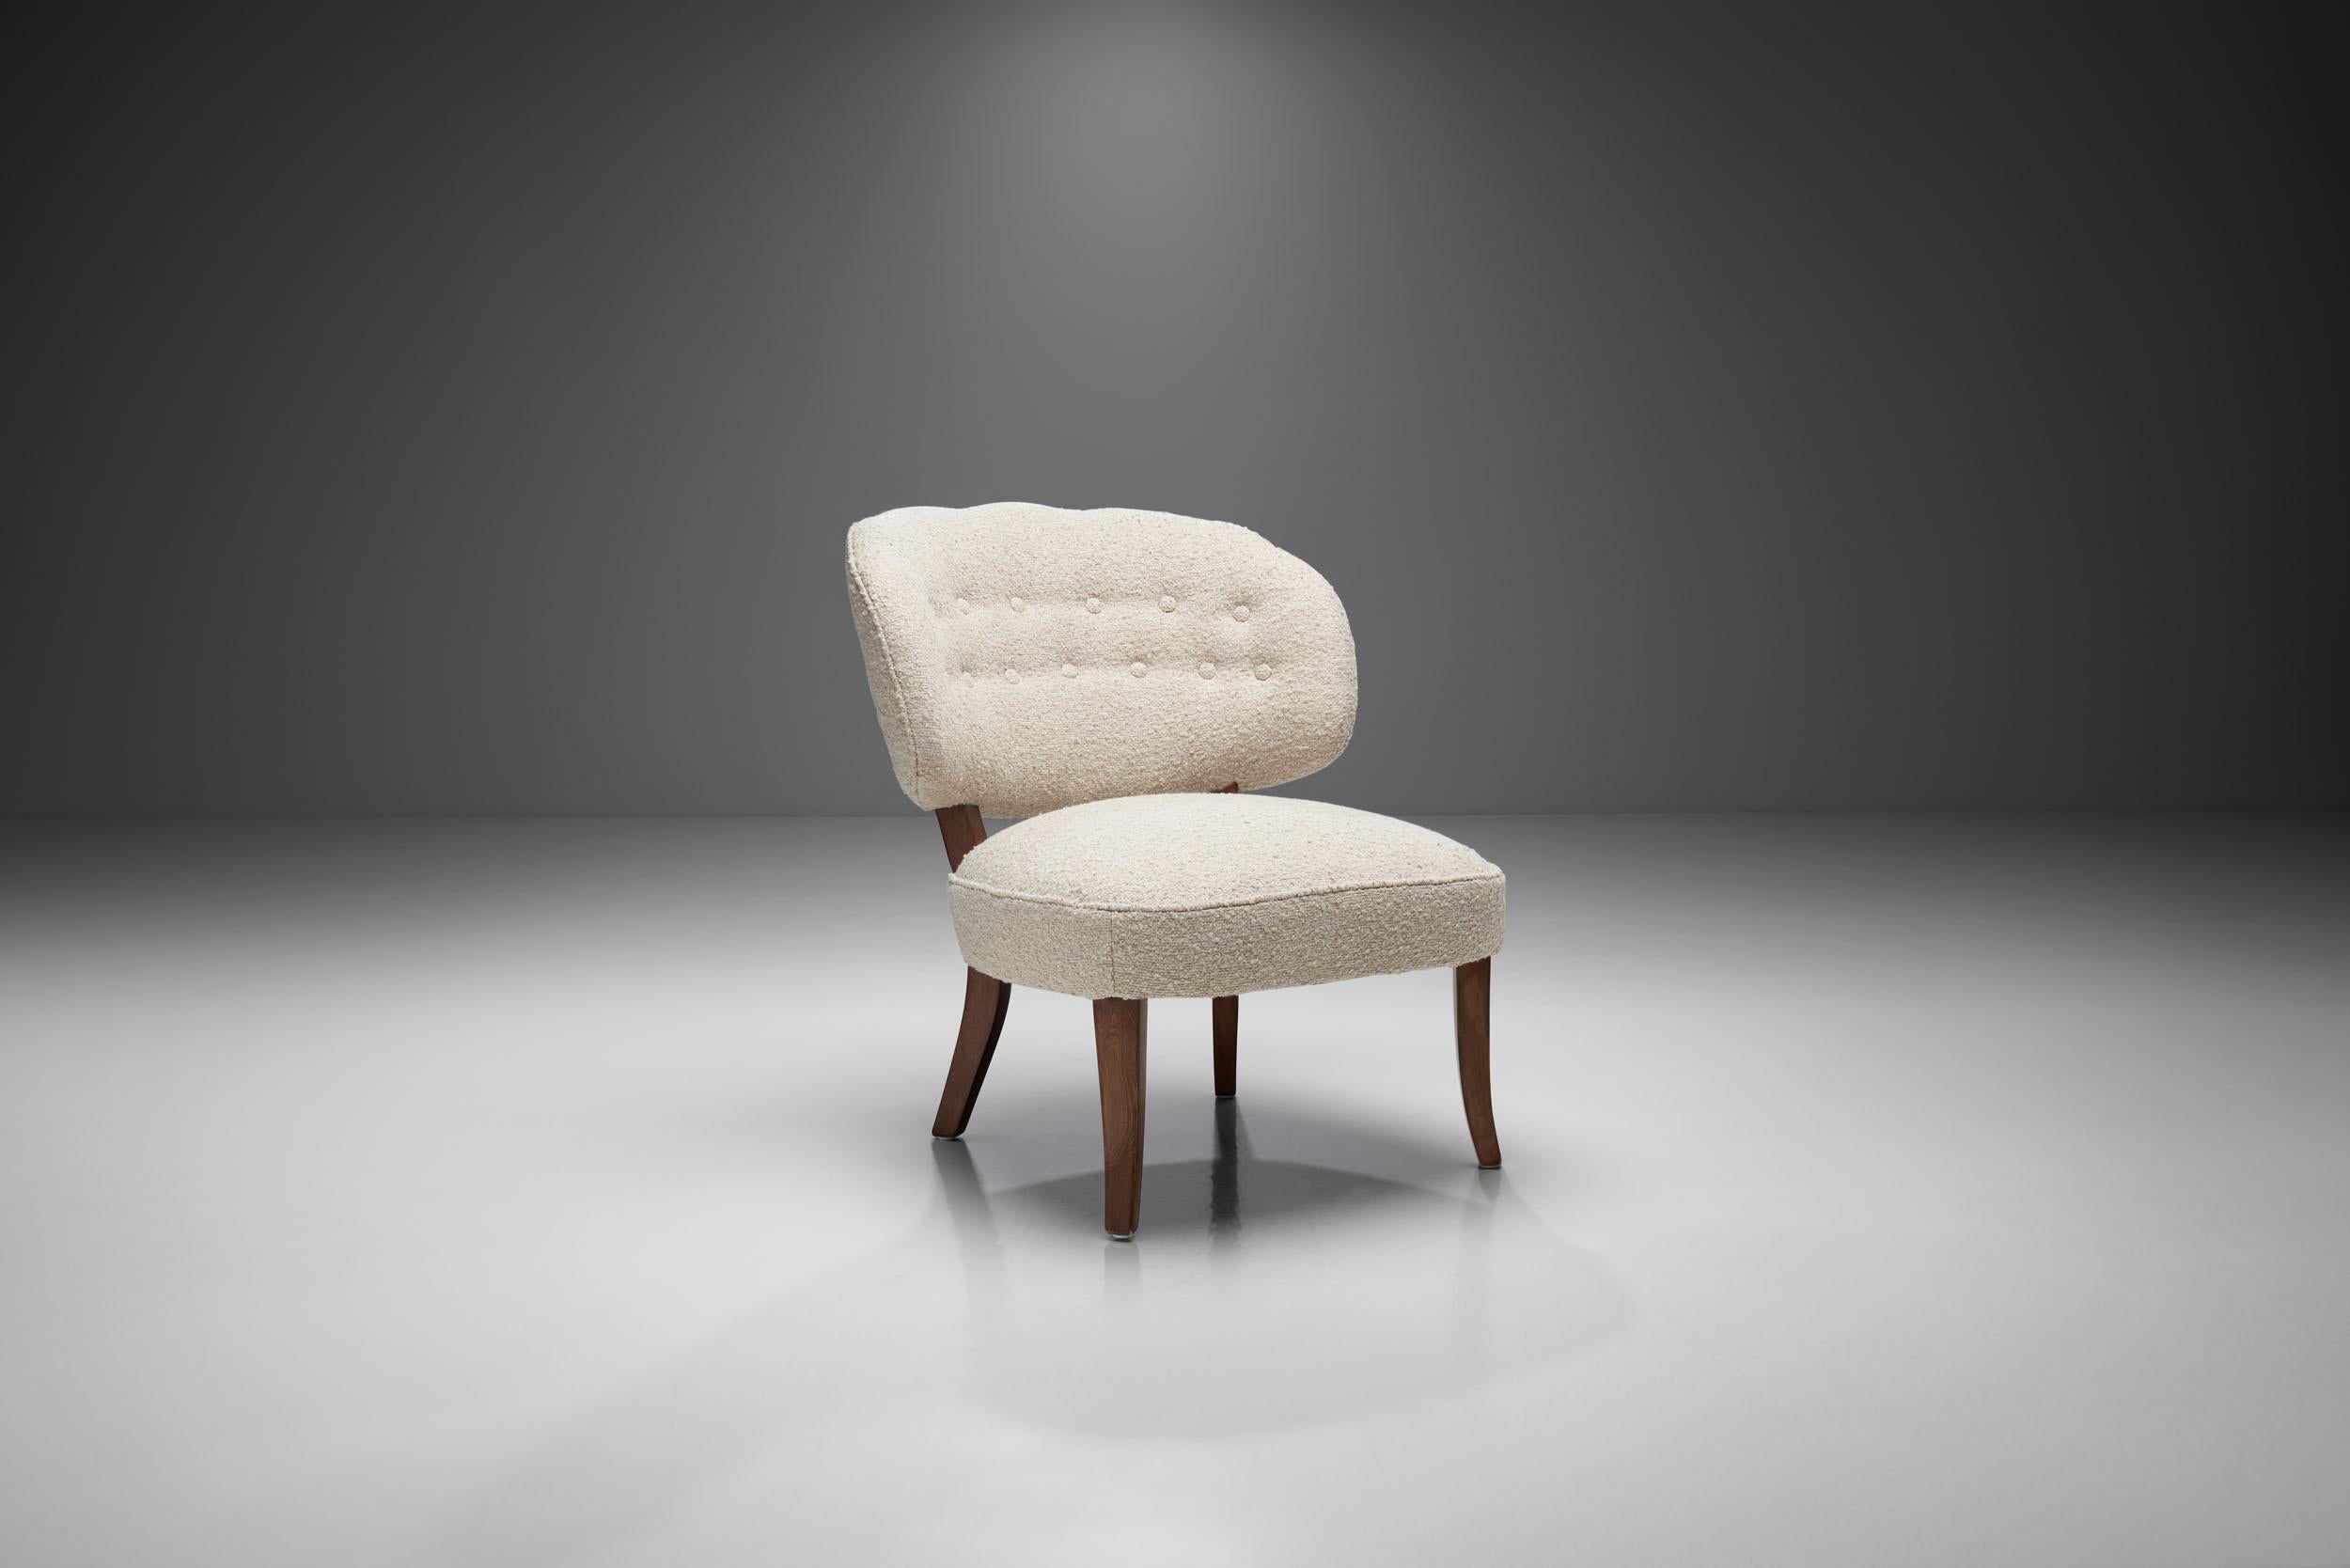 This “Old Berlin” chair is among Swedish icon, Carl Malmsten’s rarer models. The dark wood, the beautiful upholstery, and Malmsten’s timeless design makes this model a beautiful representation of Sweden’s mid-century design history. 

This model,